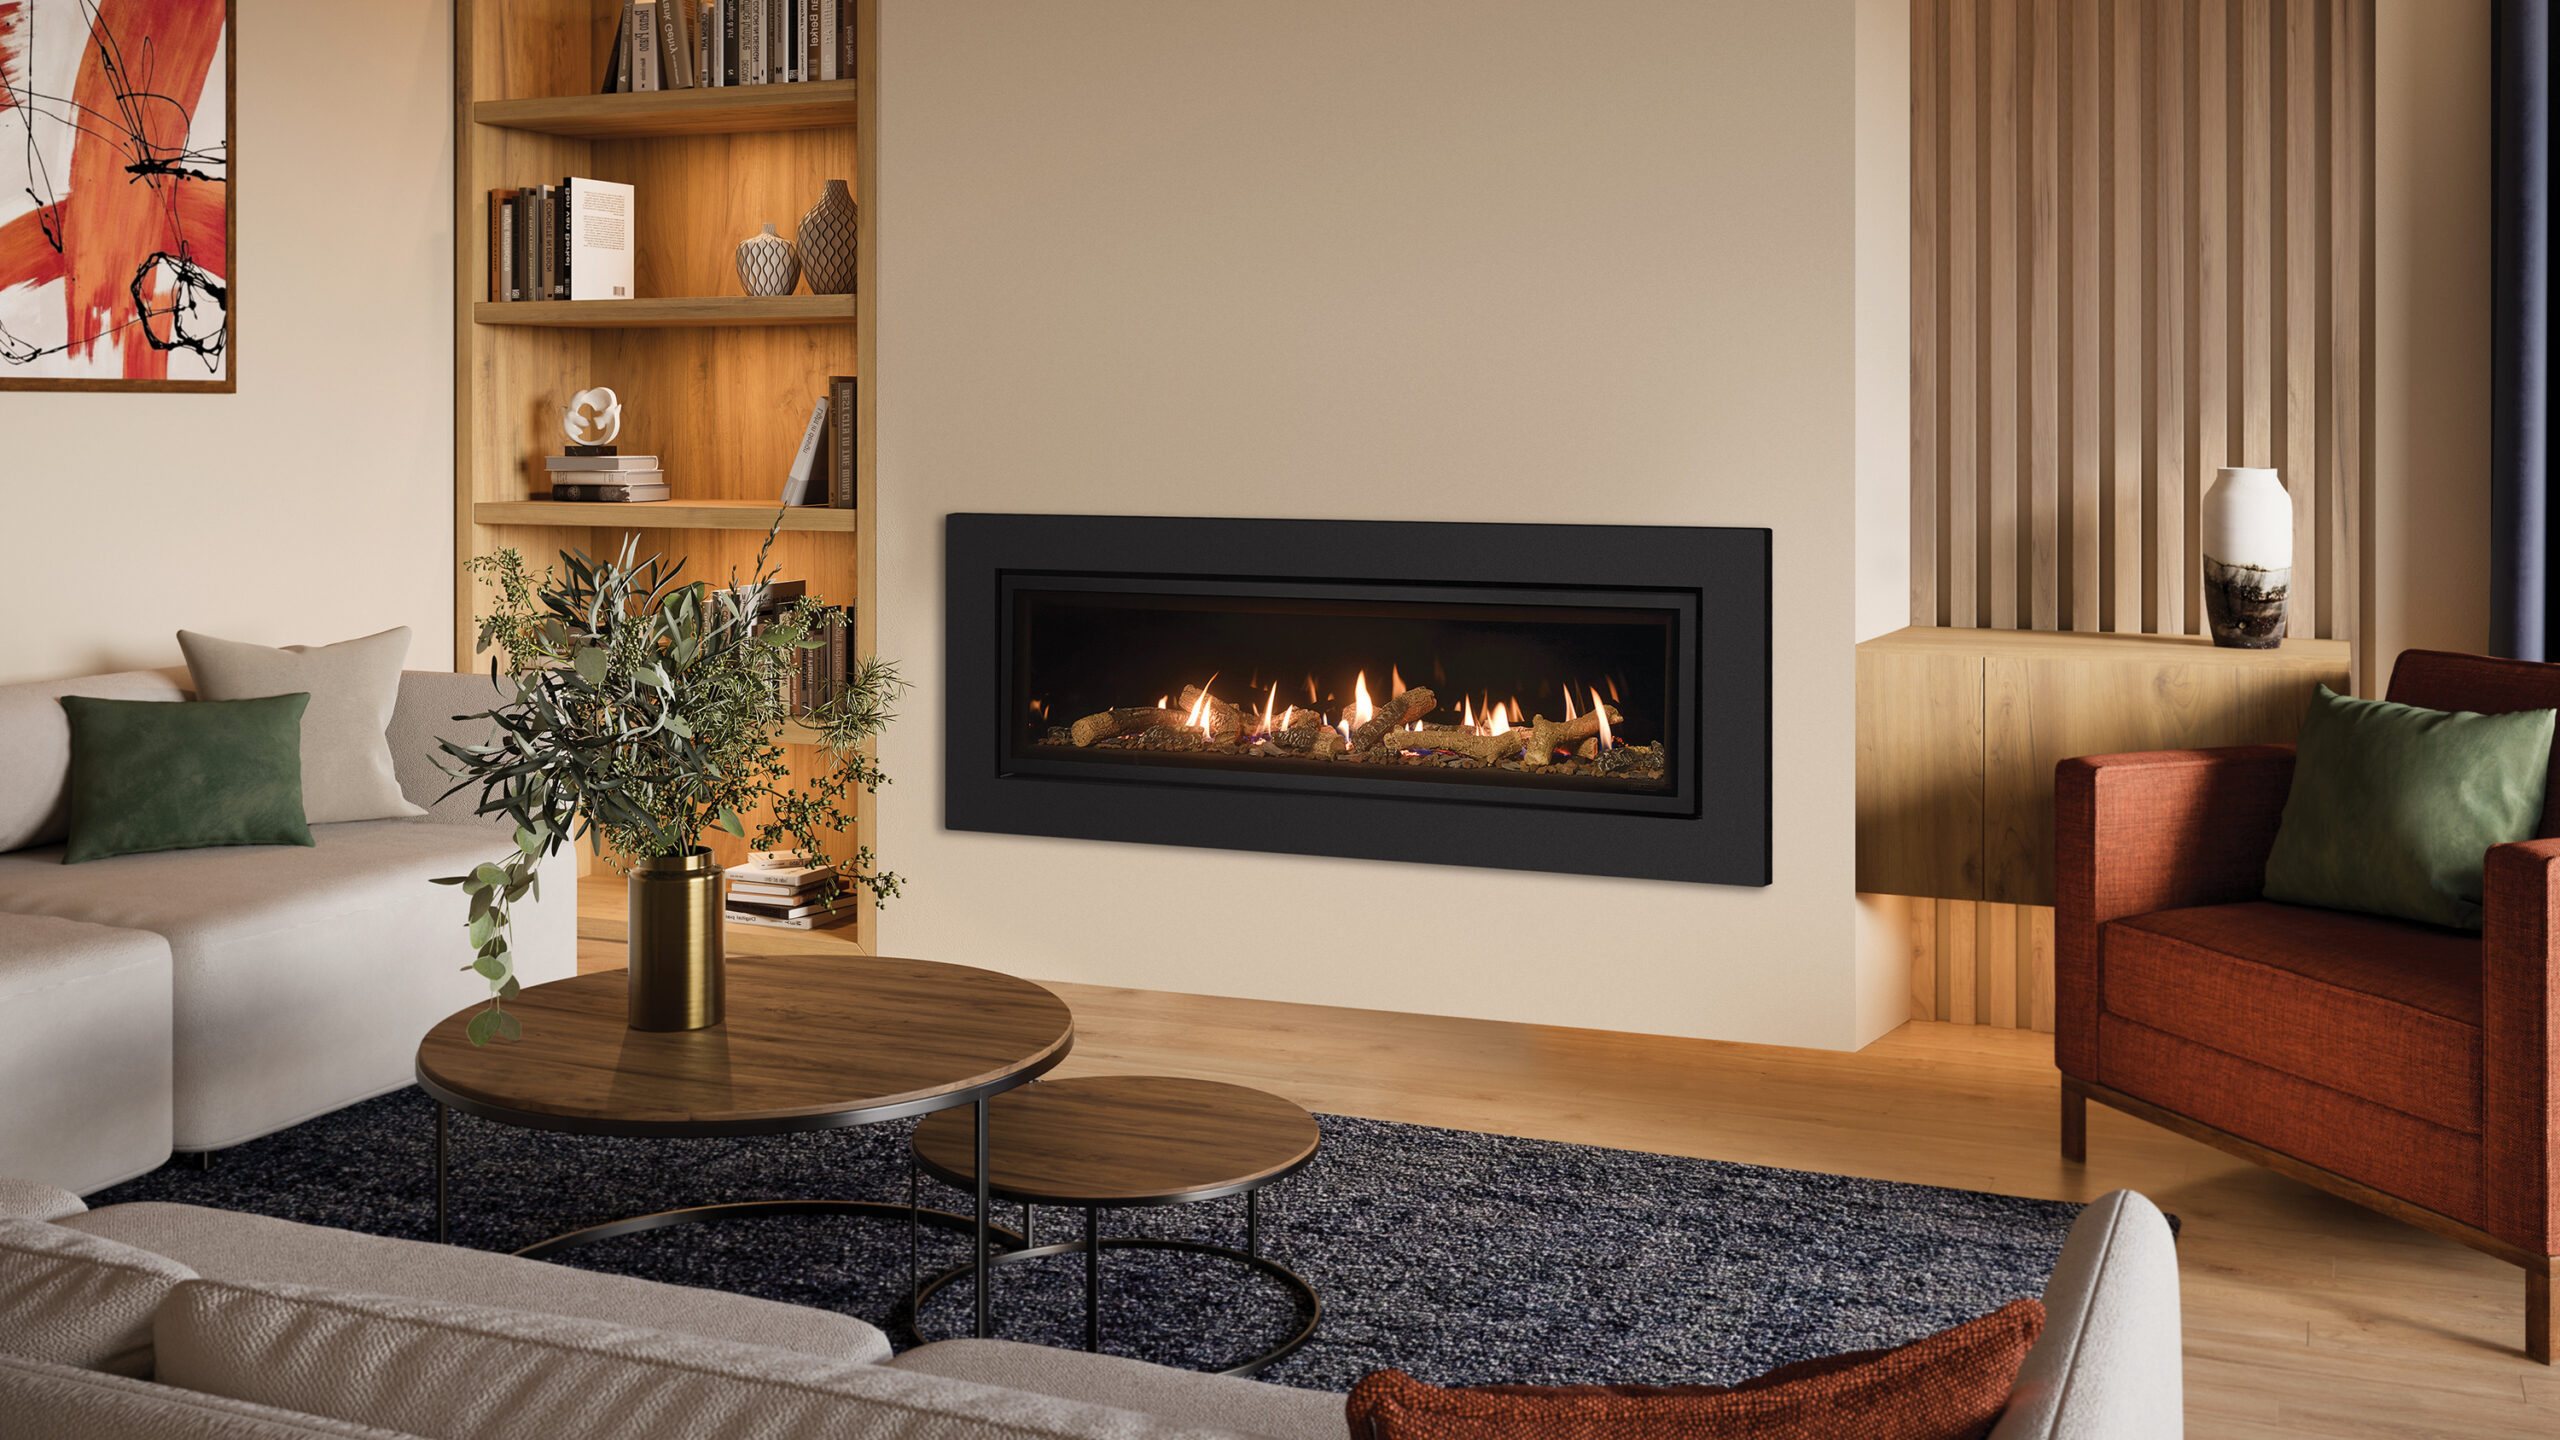 Gazco Studio 3 modern gas fireplace with Expression frame Modern Contemporary Fireplaces